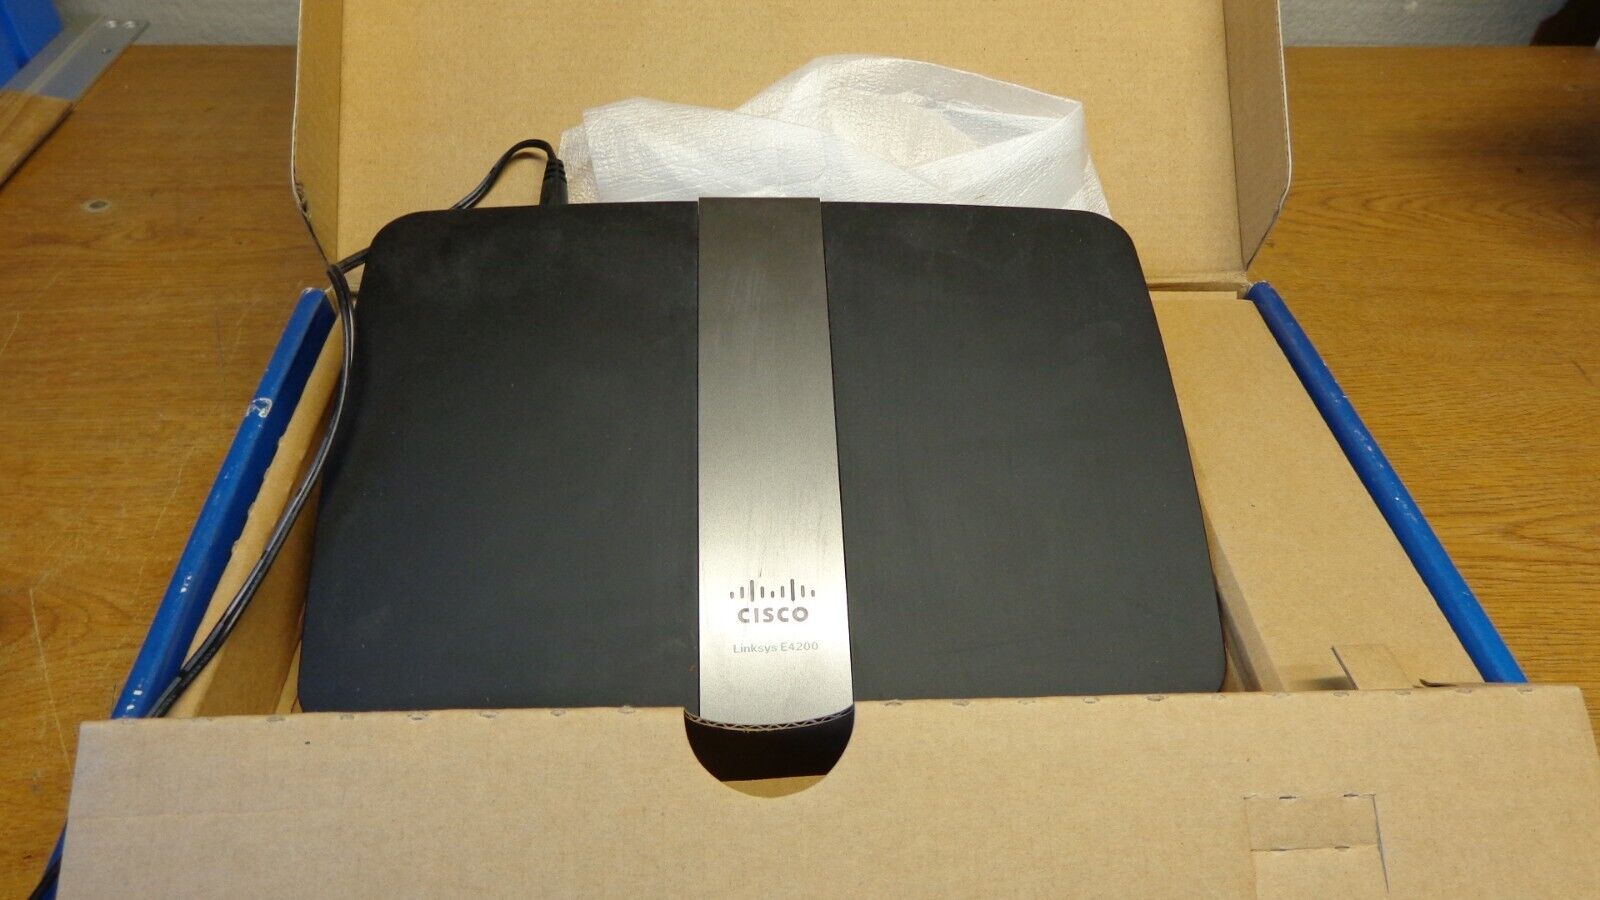 Cisco Linksys E4200 Wireless Dual Band N Router w/ Adapter and Ethernet